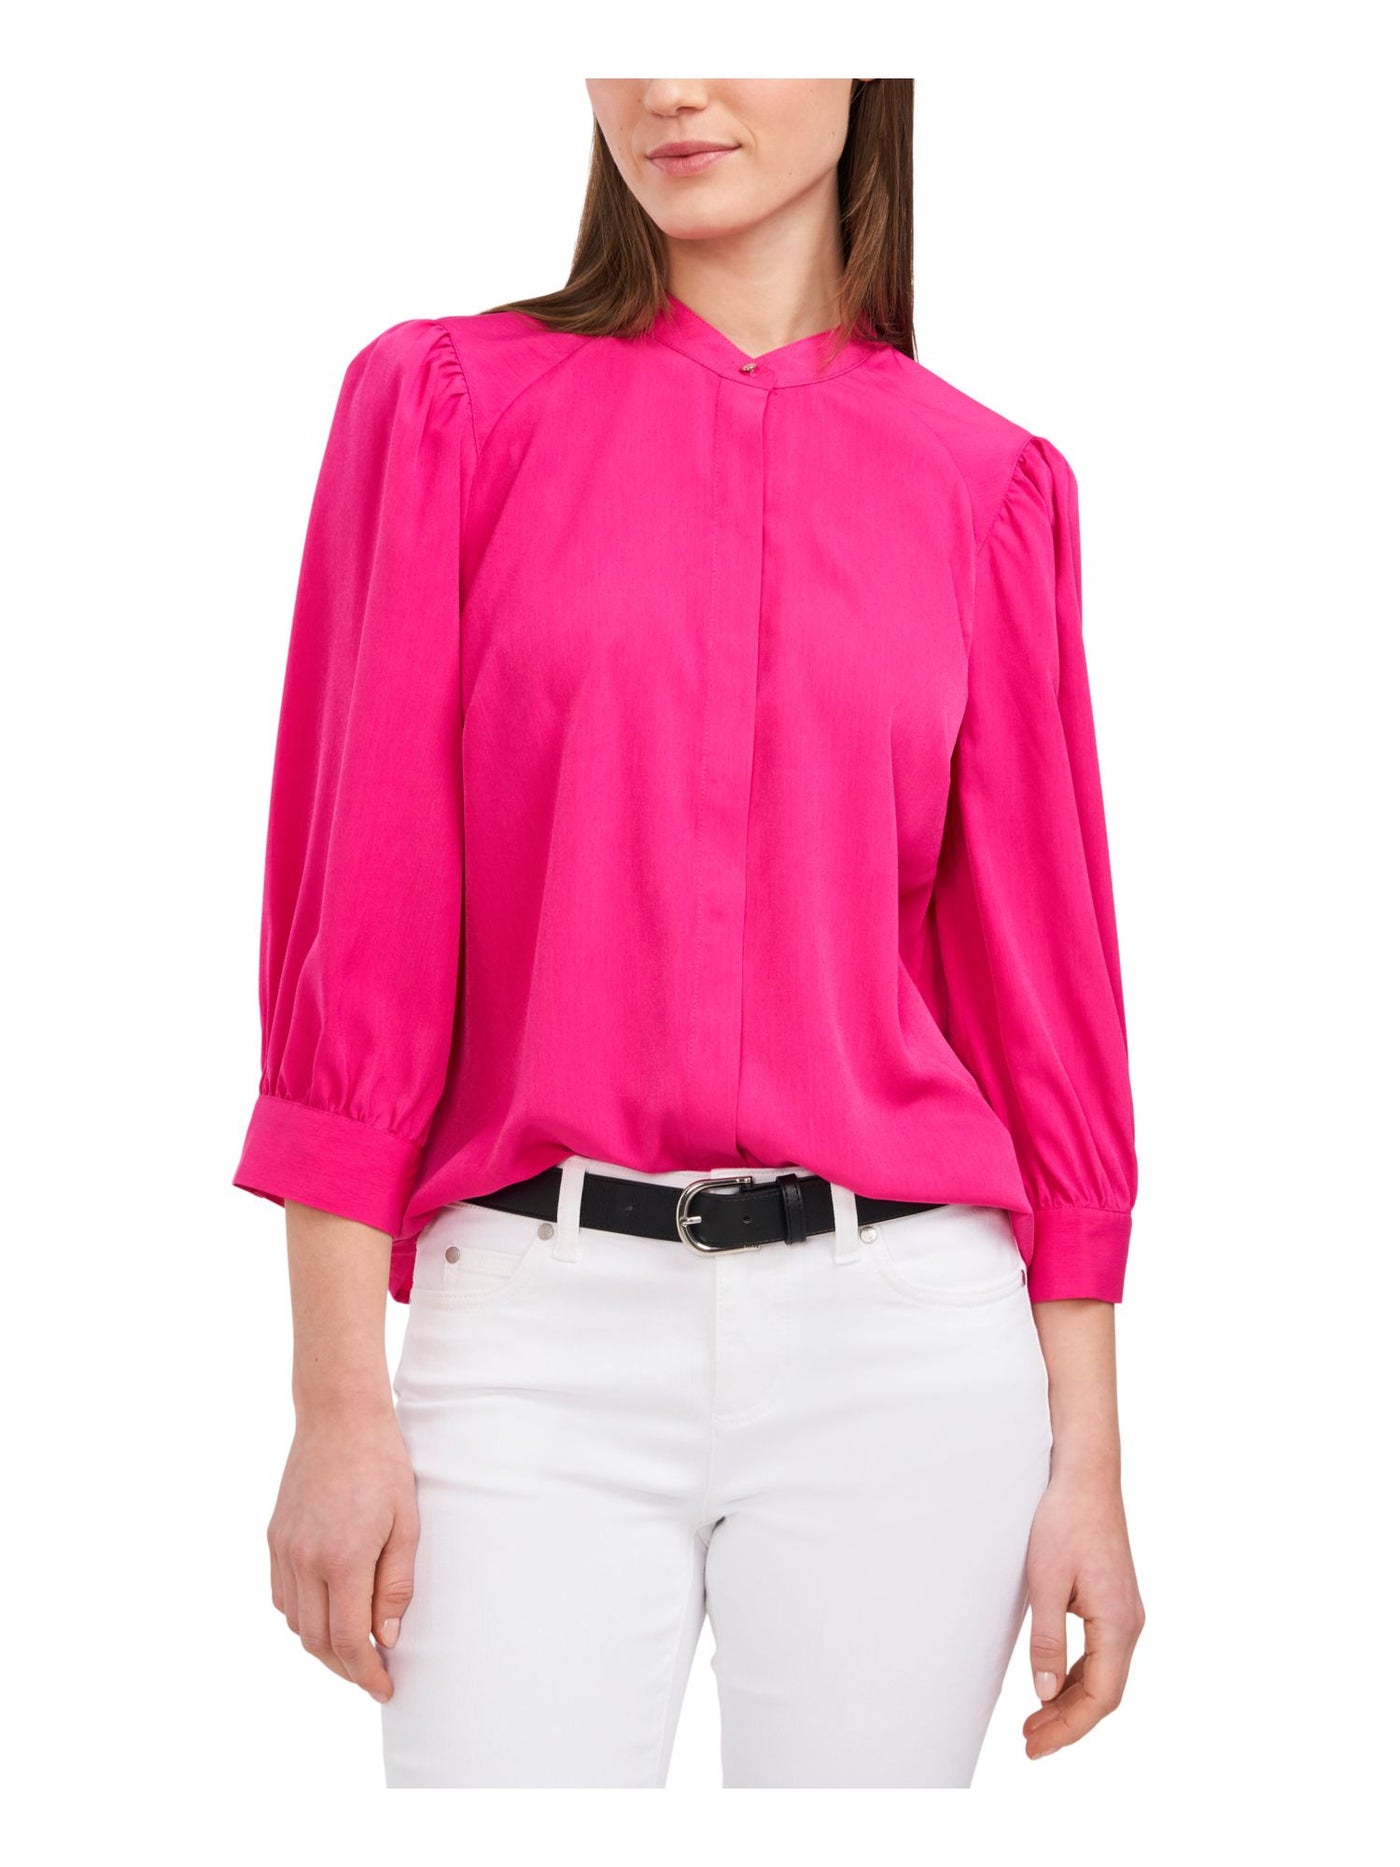 RILEY&RAE Womens Pink Pleated Darted Cuffed Sleeve Blouse XS